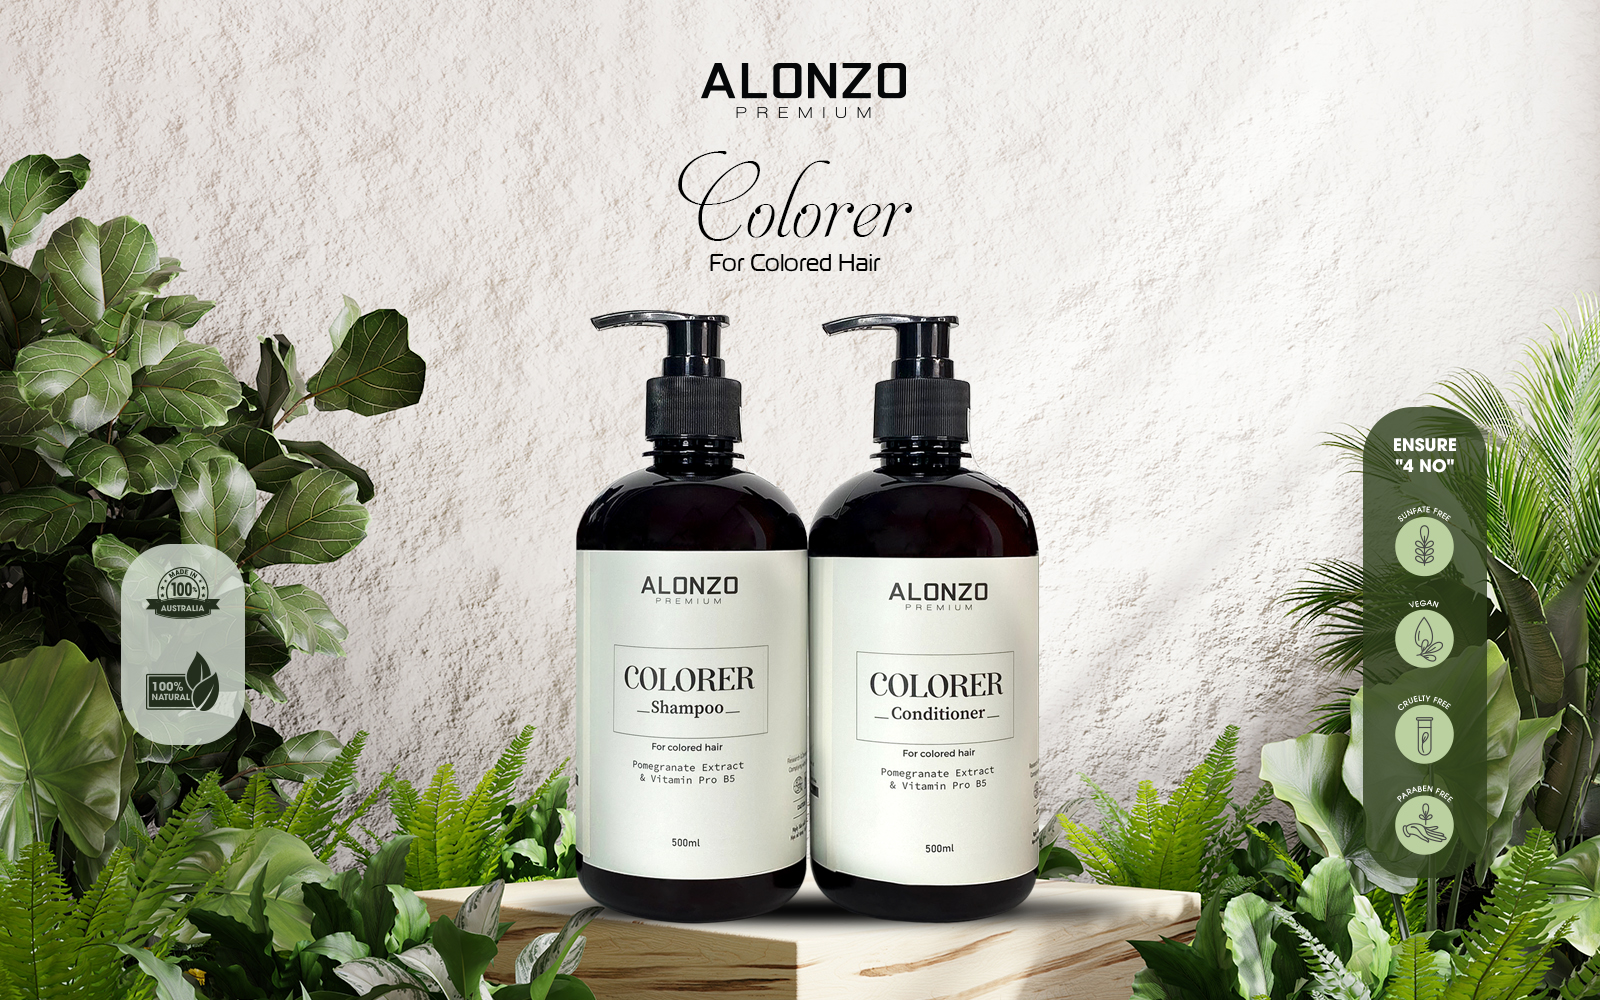 Colorer - For colored hair